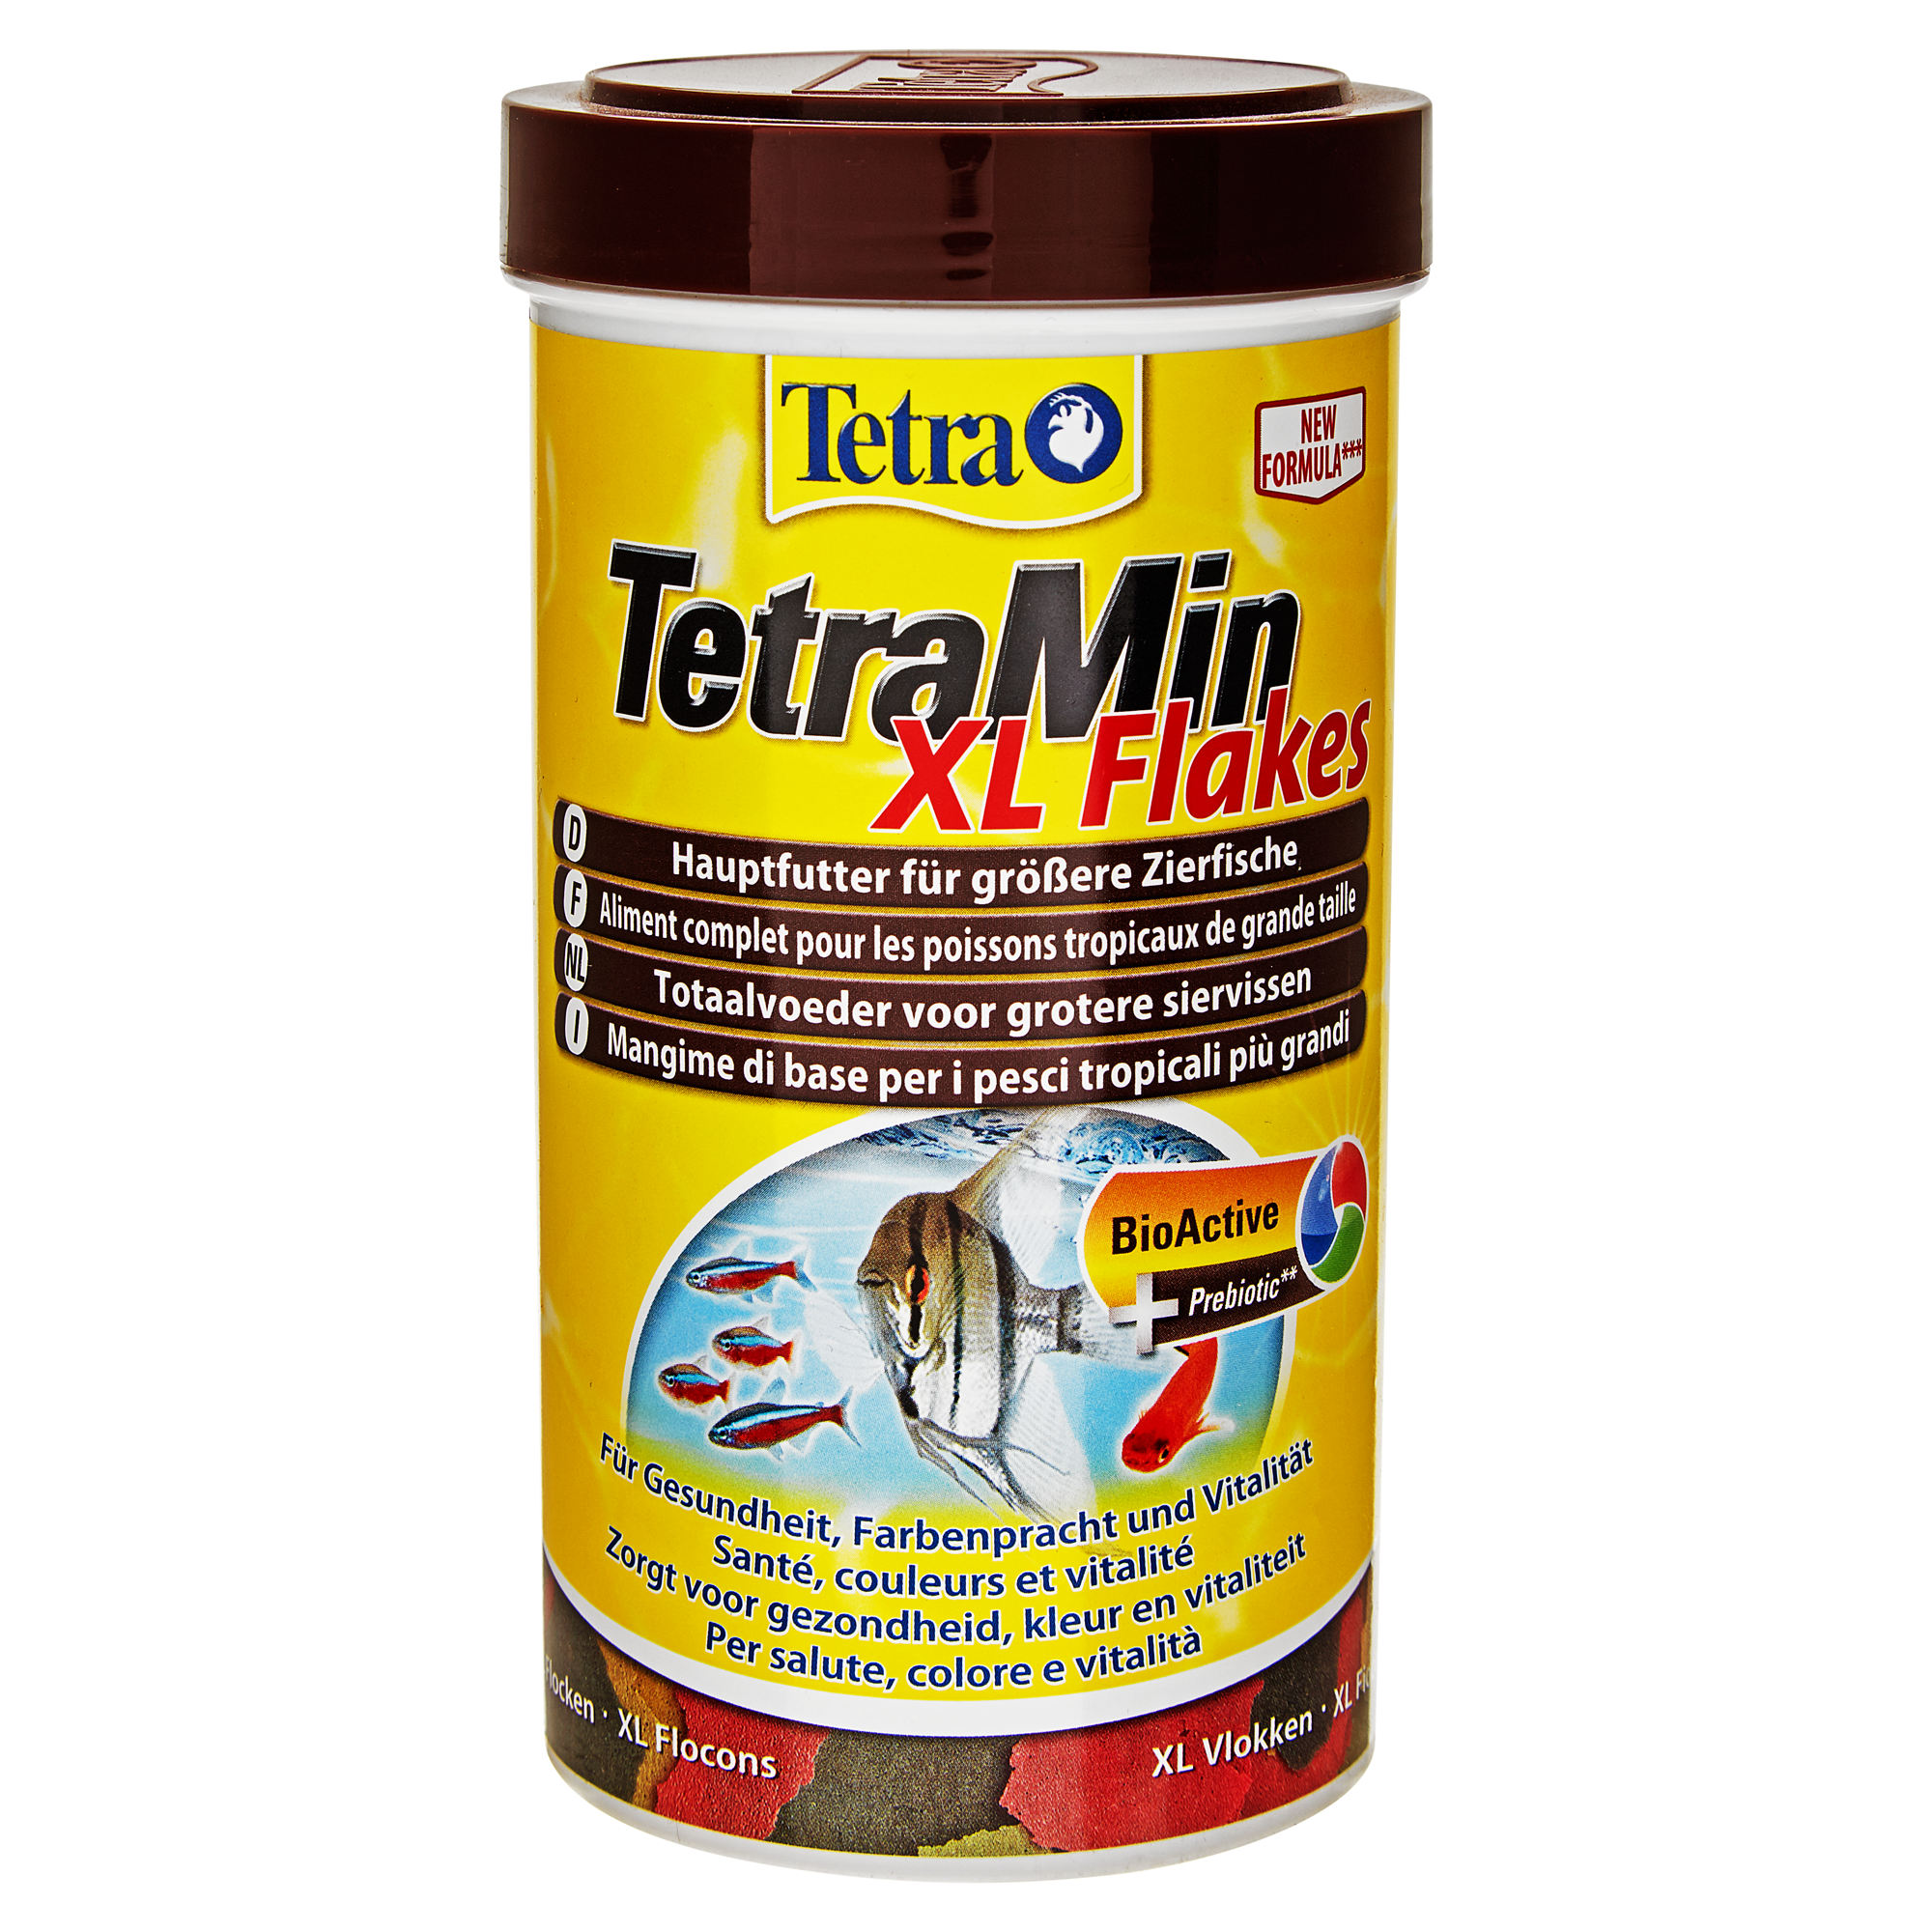 Fischfutter TetraMin XL Flakes 80 g + product picture